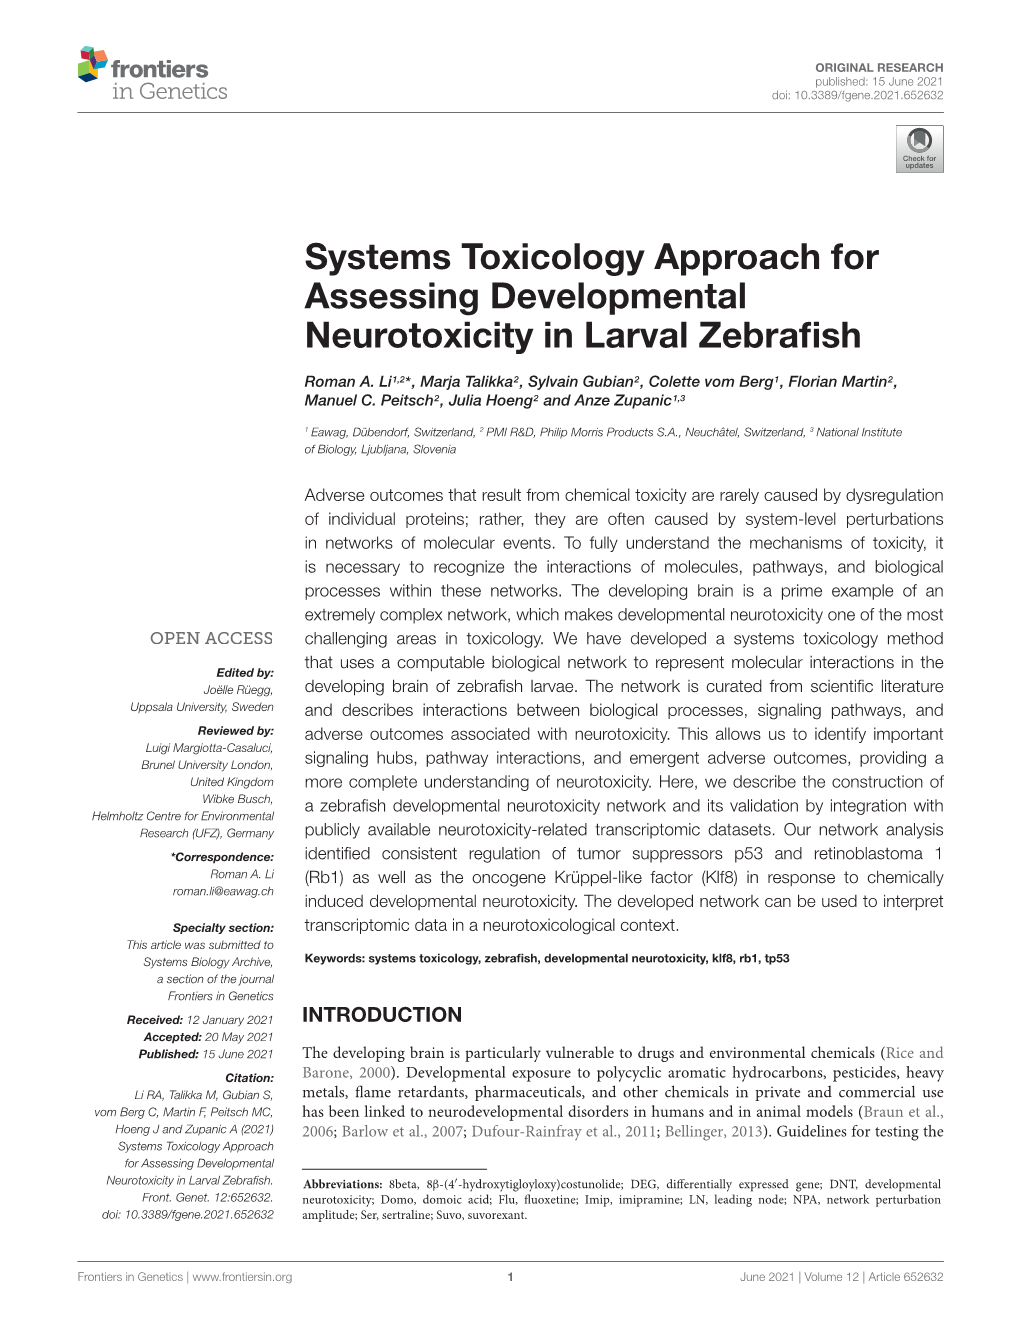 Systems Toxicology Approach for Assessing Developmental Neurotoxicity in Larval Zebraﬁsh